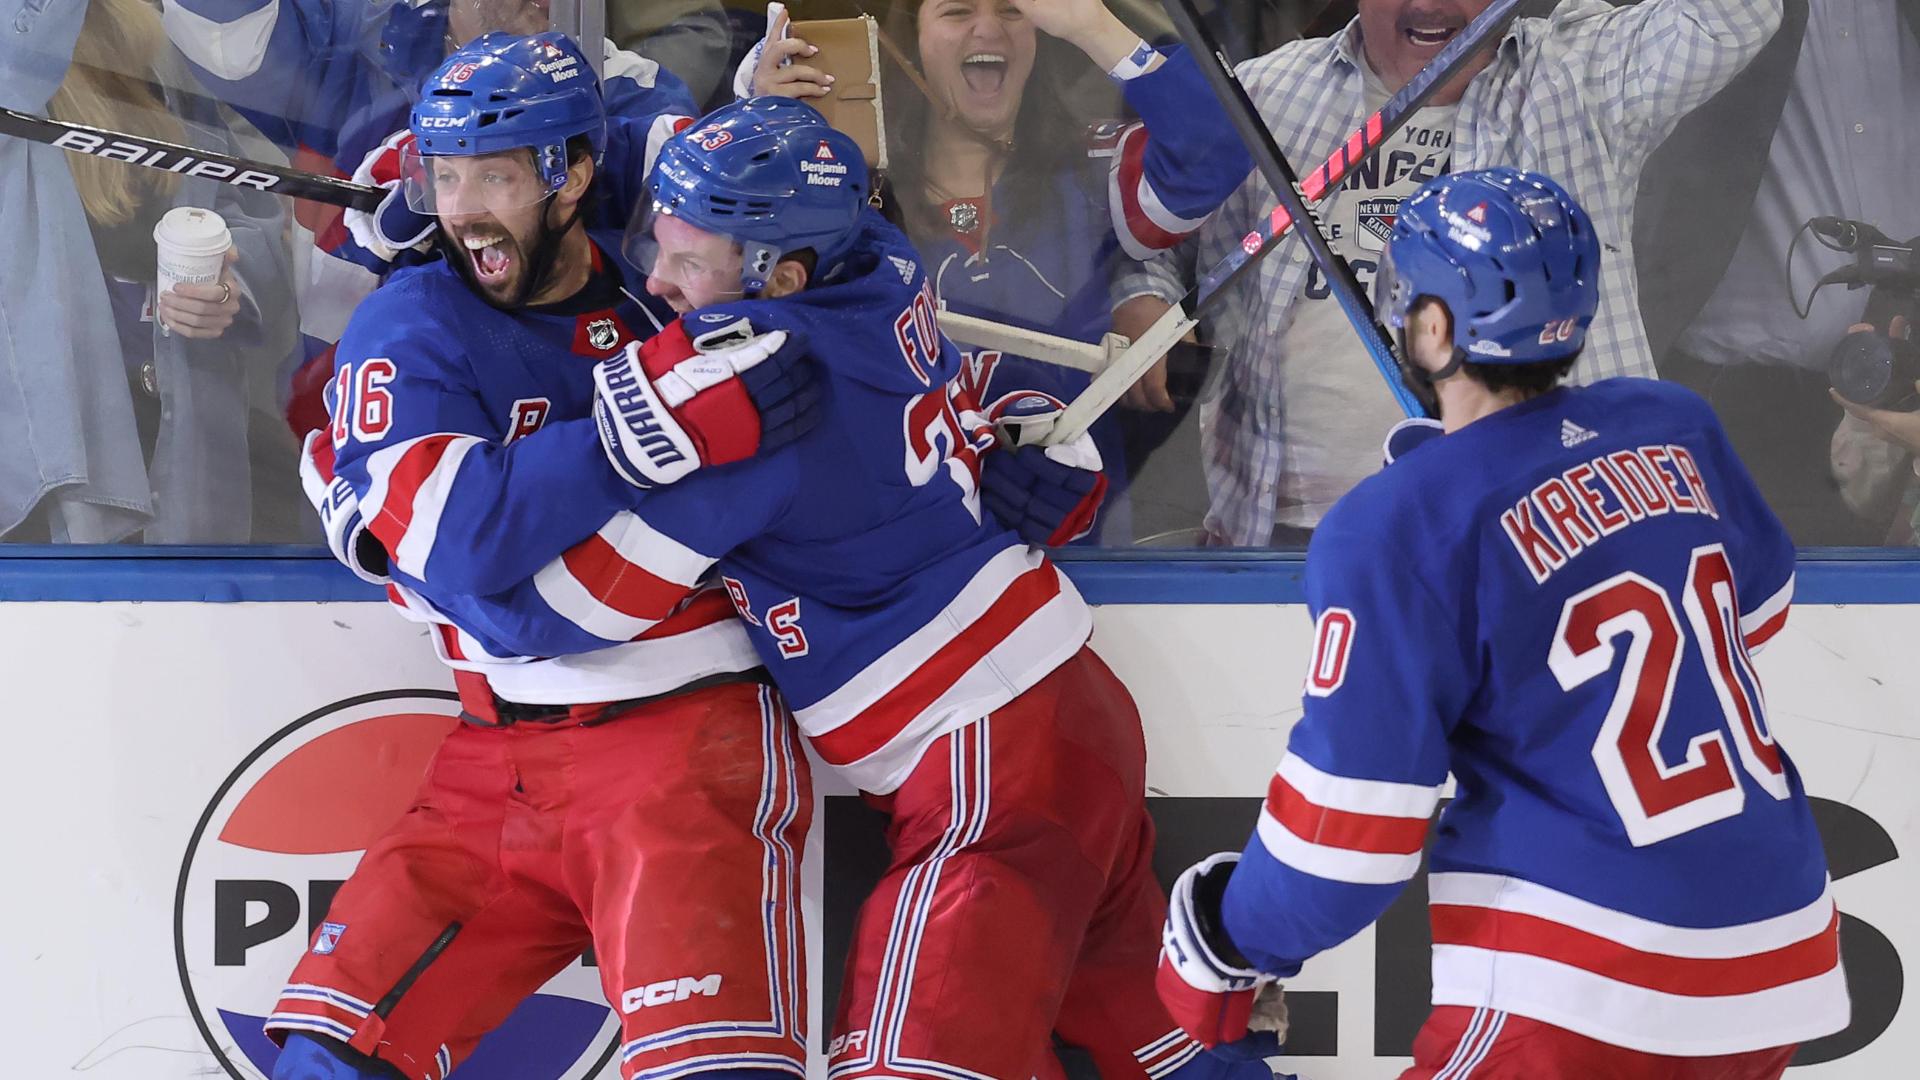 Vincent Trocheck calls game for Rangers with clutch goal in 2OT